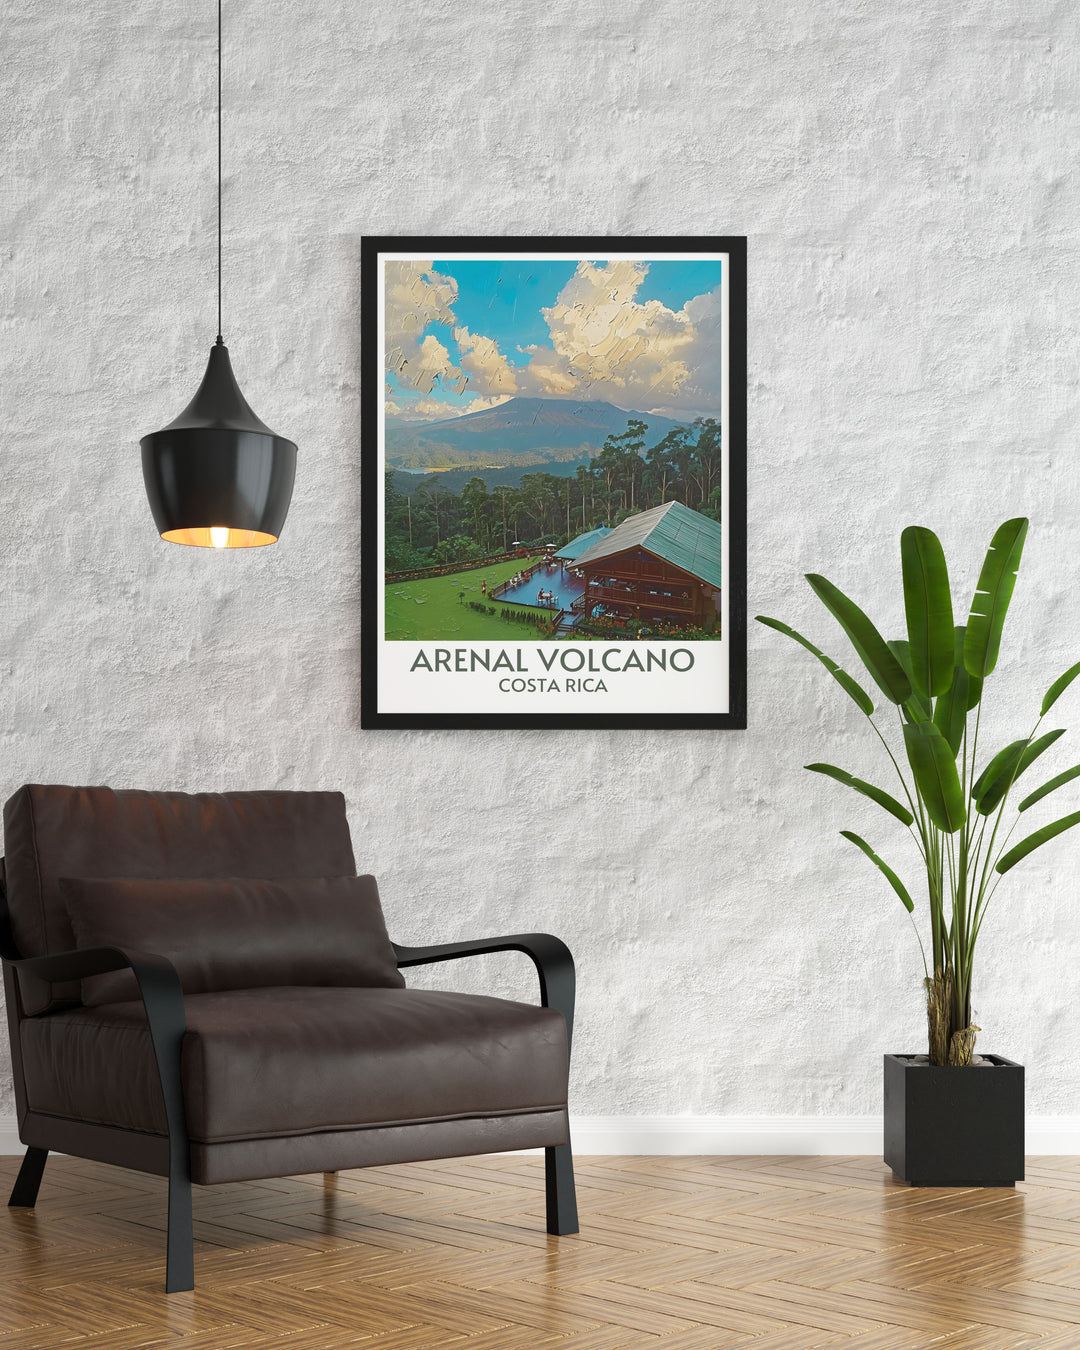 Enjoy the peaceful setting of The Arenal Observatory Lounge and Spa in this vibrant print with lush greenery and volcanic views.